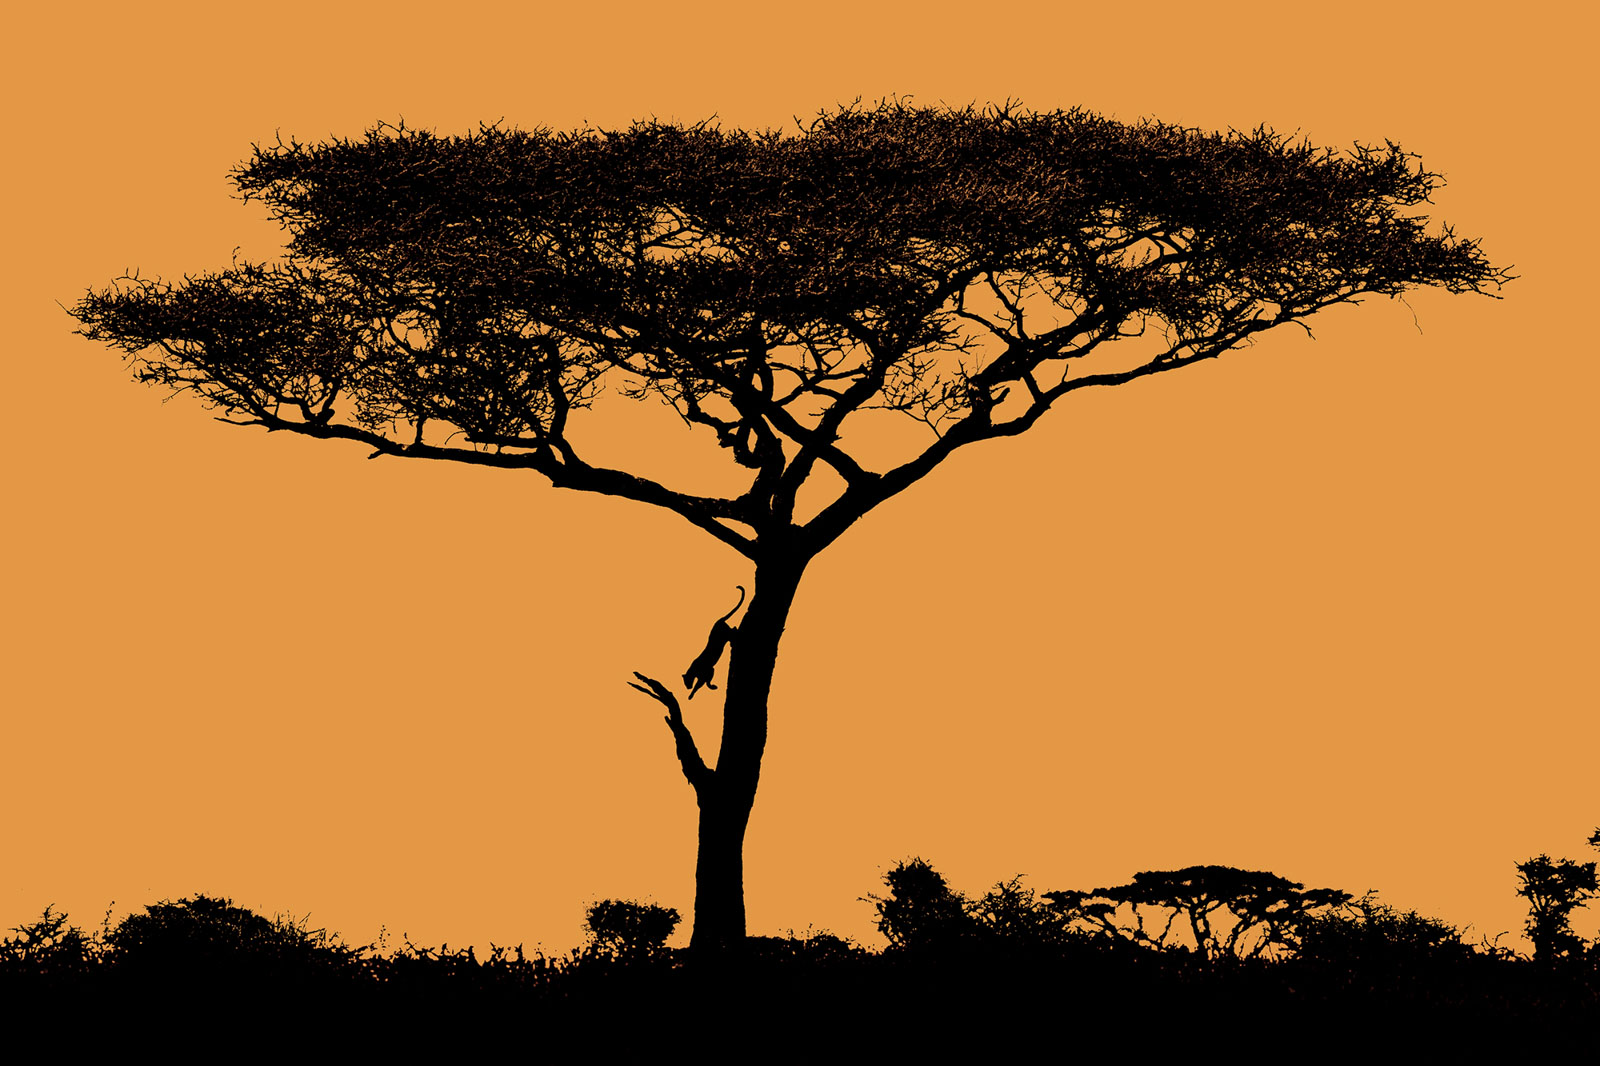 Leopard jumping down a tree - silhouette 